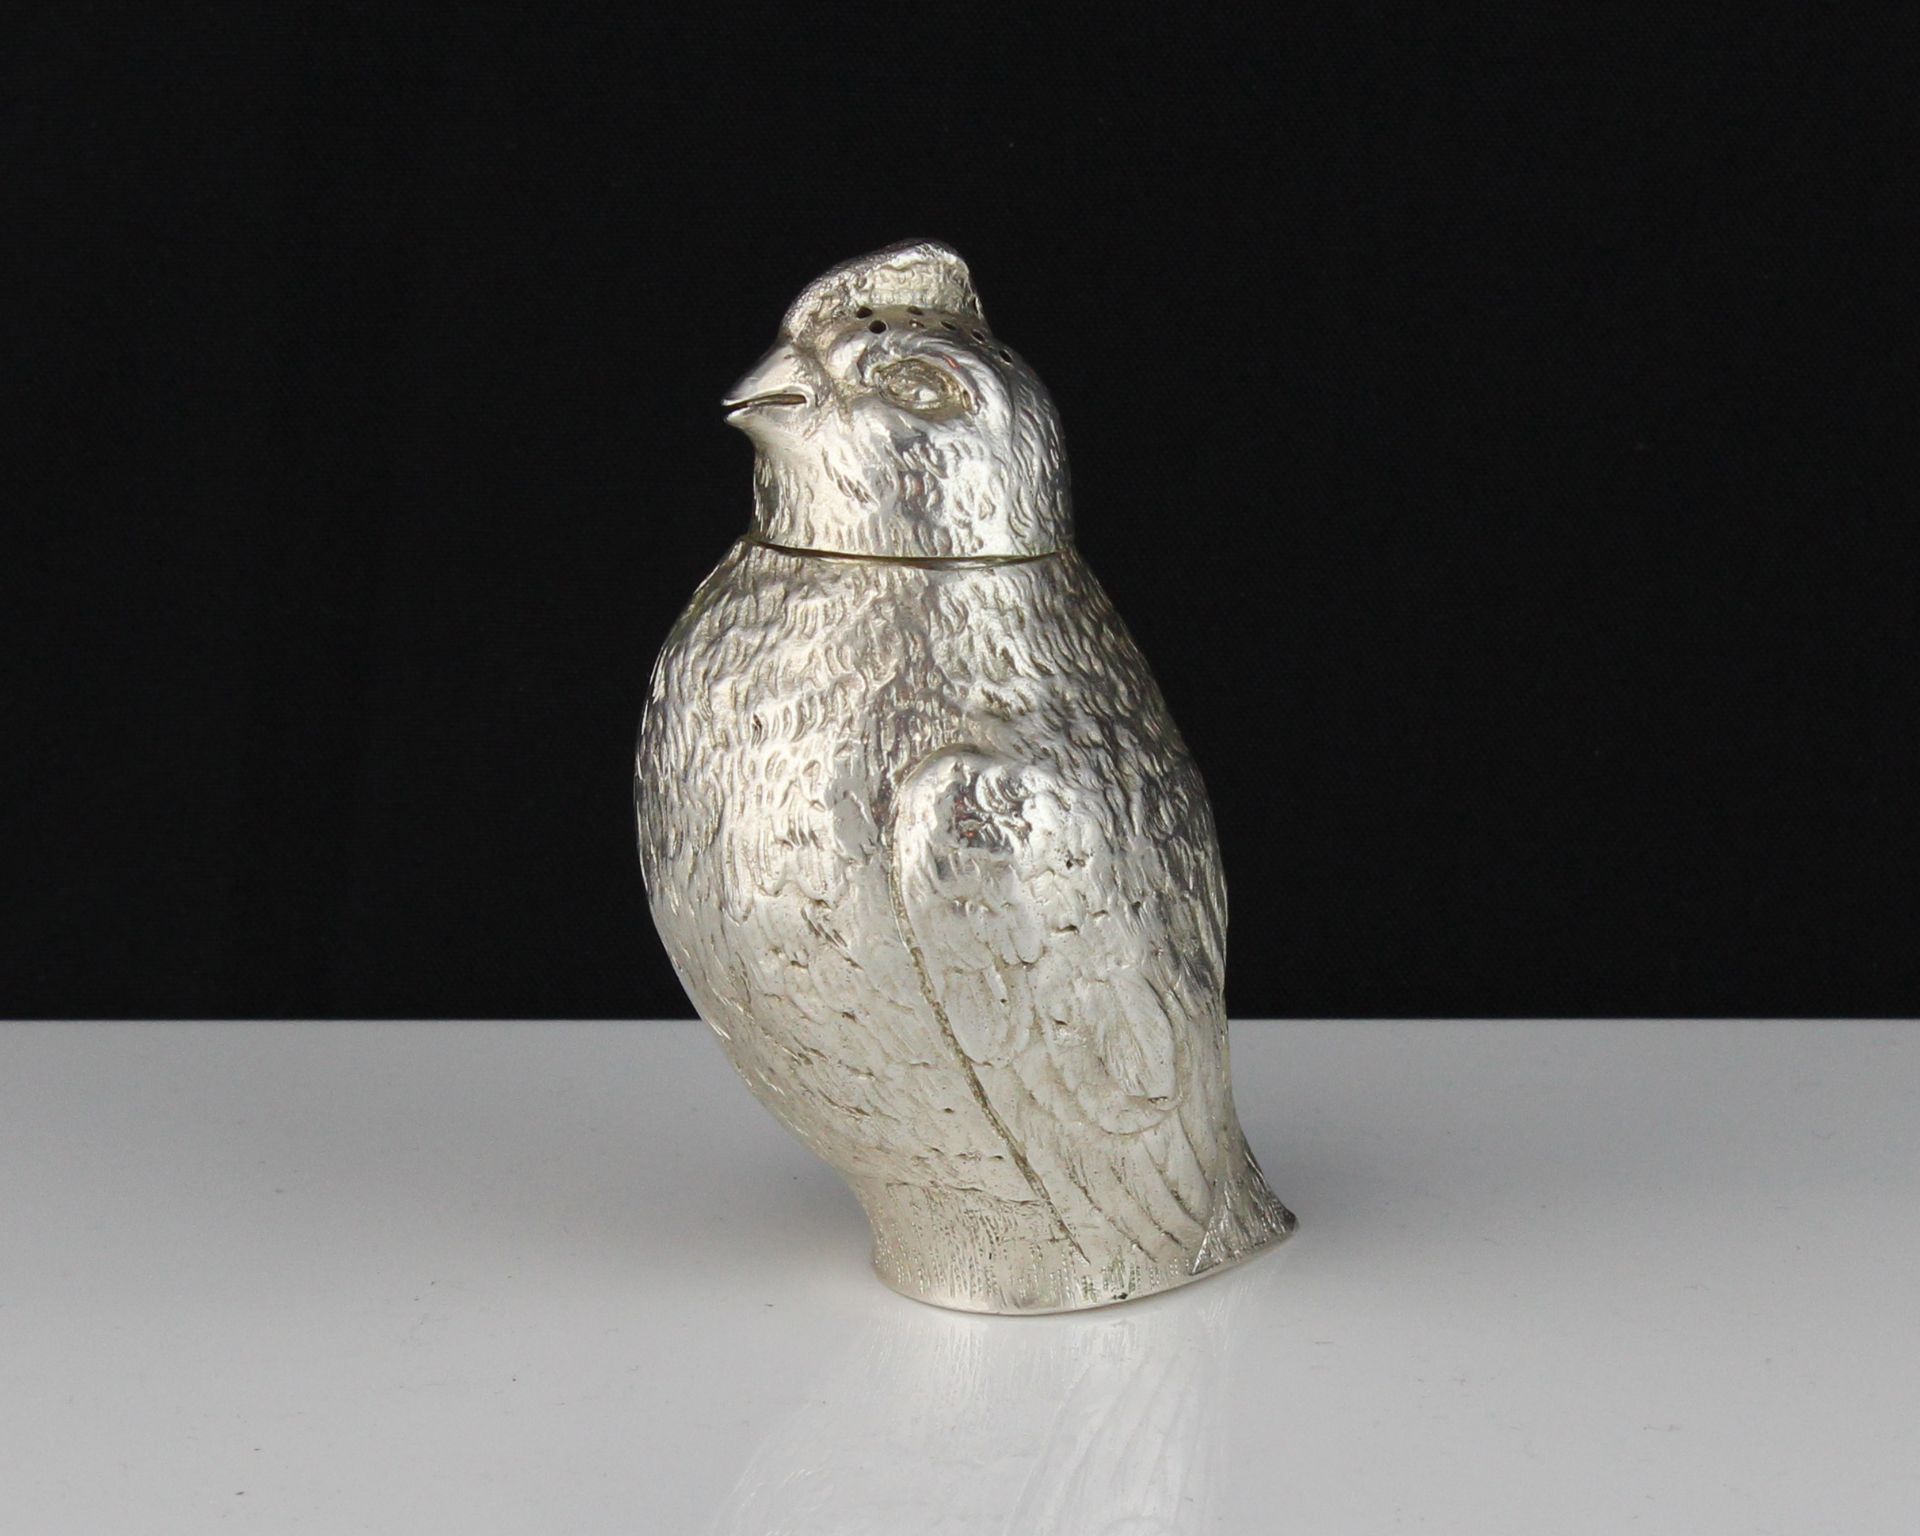 An antique novelty silver chick / chicken pepperette with removable lid. Height 9.5cm / 3.75".